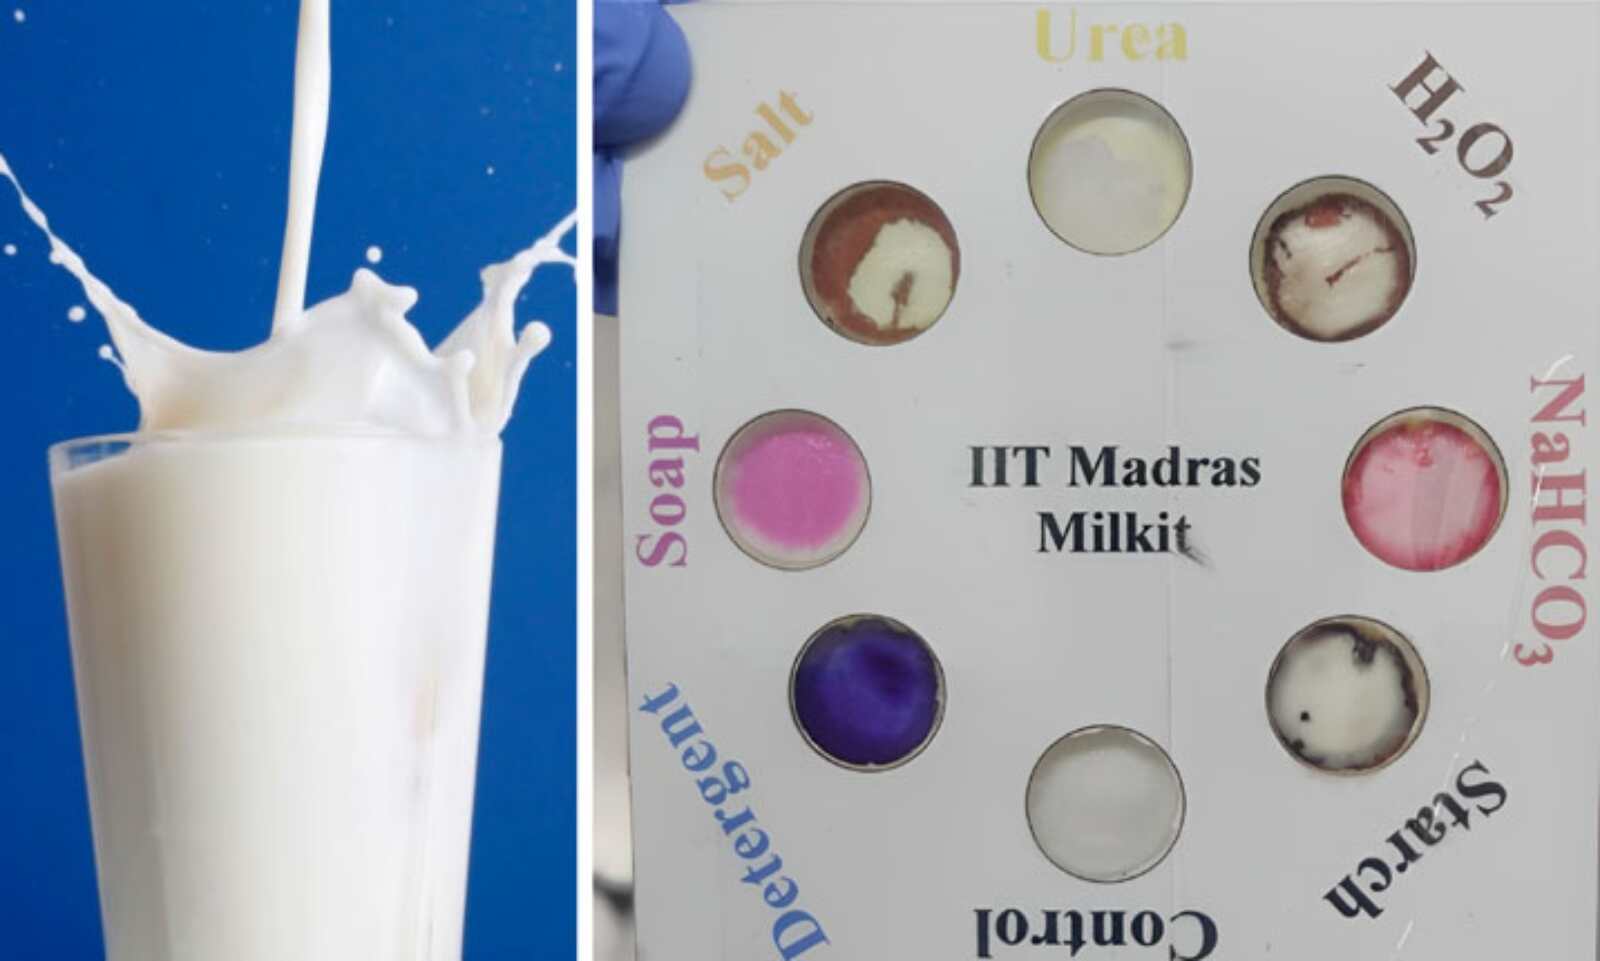 IIT Madras researchers develop pocket-friendly device to detect adulteration in milk_40.1